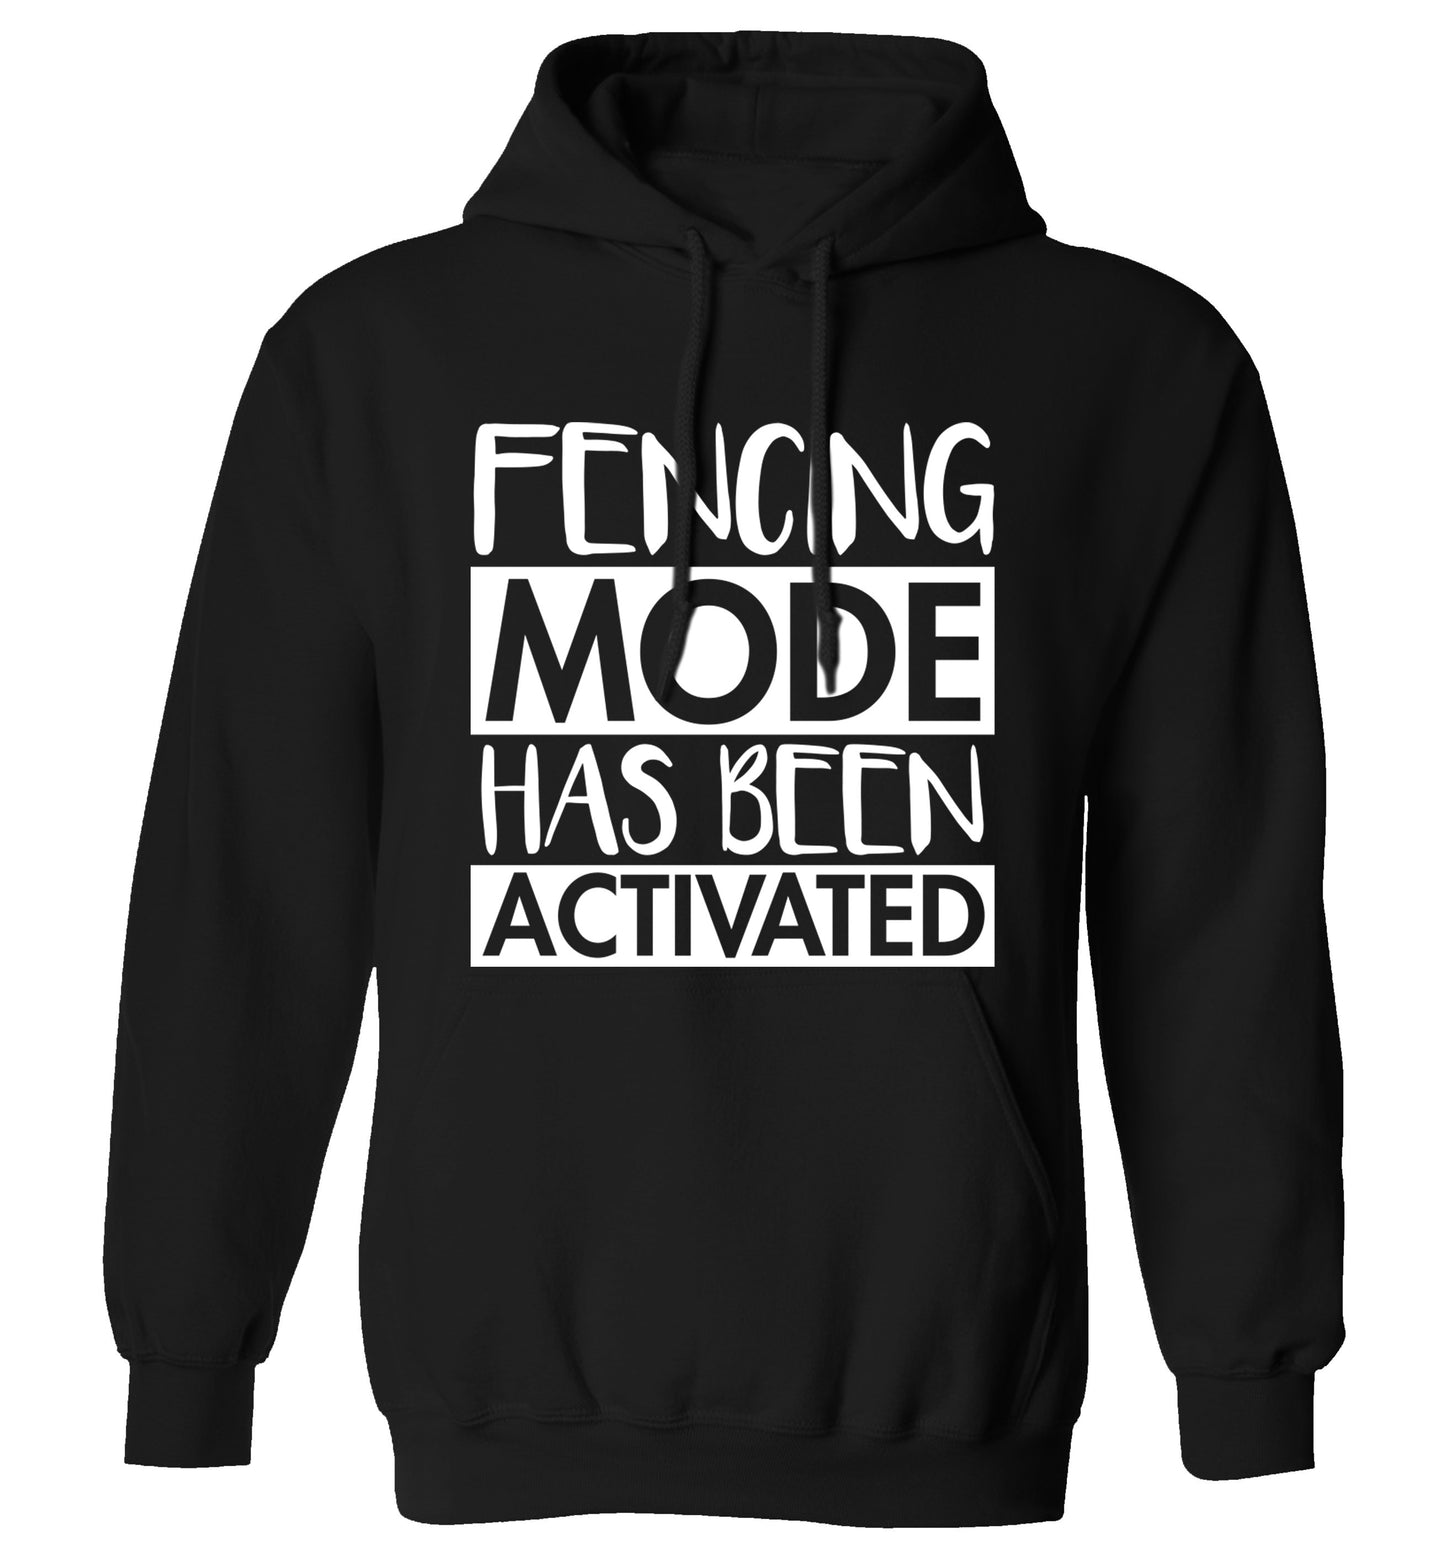 Fencing mode activated adults unisex black hoodie 2XL